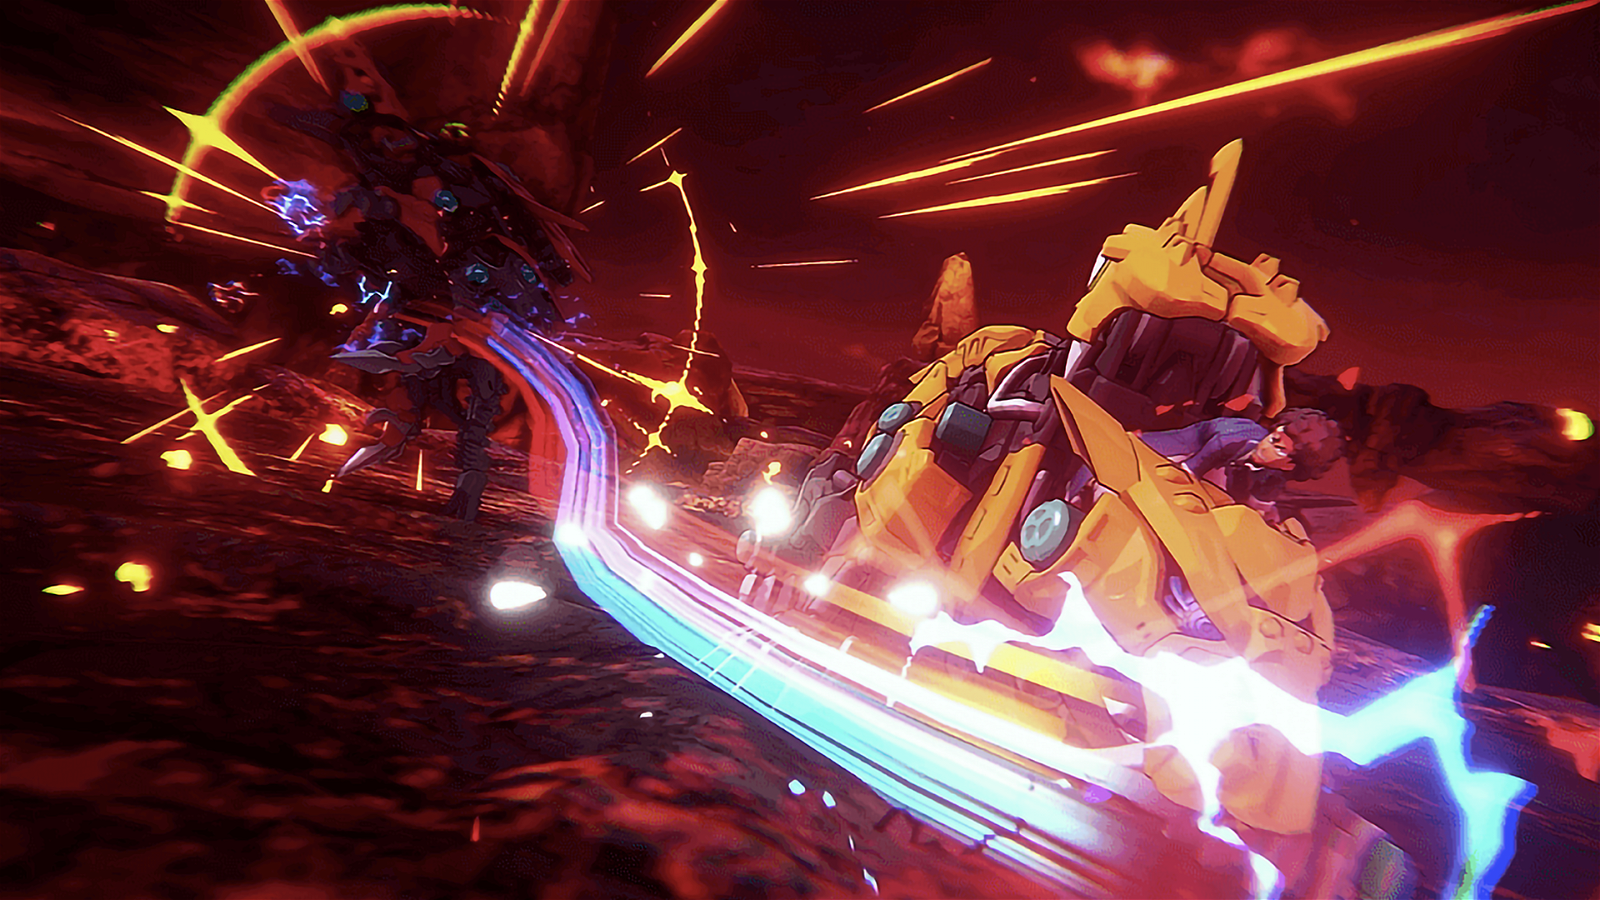 Zoids Wild: Blast Unleashed, Zoids Wild: King of Blast, Zoids Wild Blast Unleashed, Zoids Wild, Nintendo Switch, Switch, Europe, North America, Release Date, Gameplay, Features, Price, Pre-order, Trailer, Outright Games